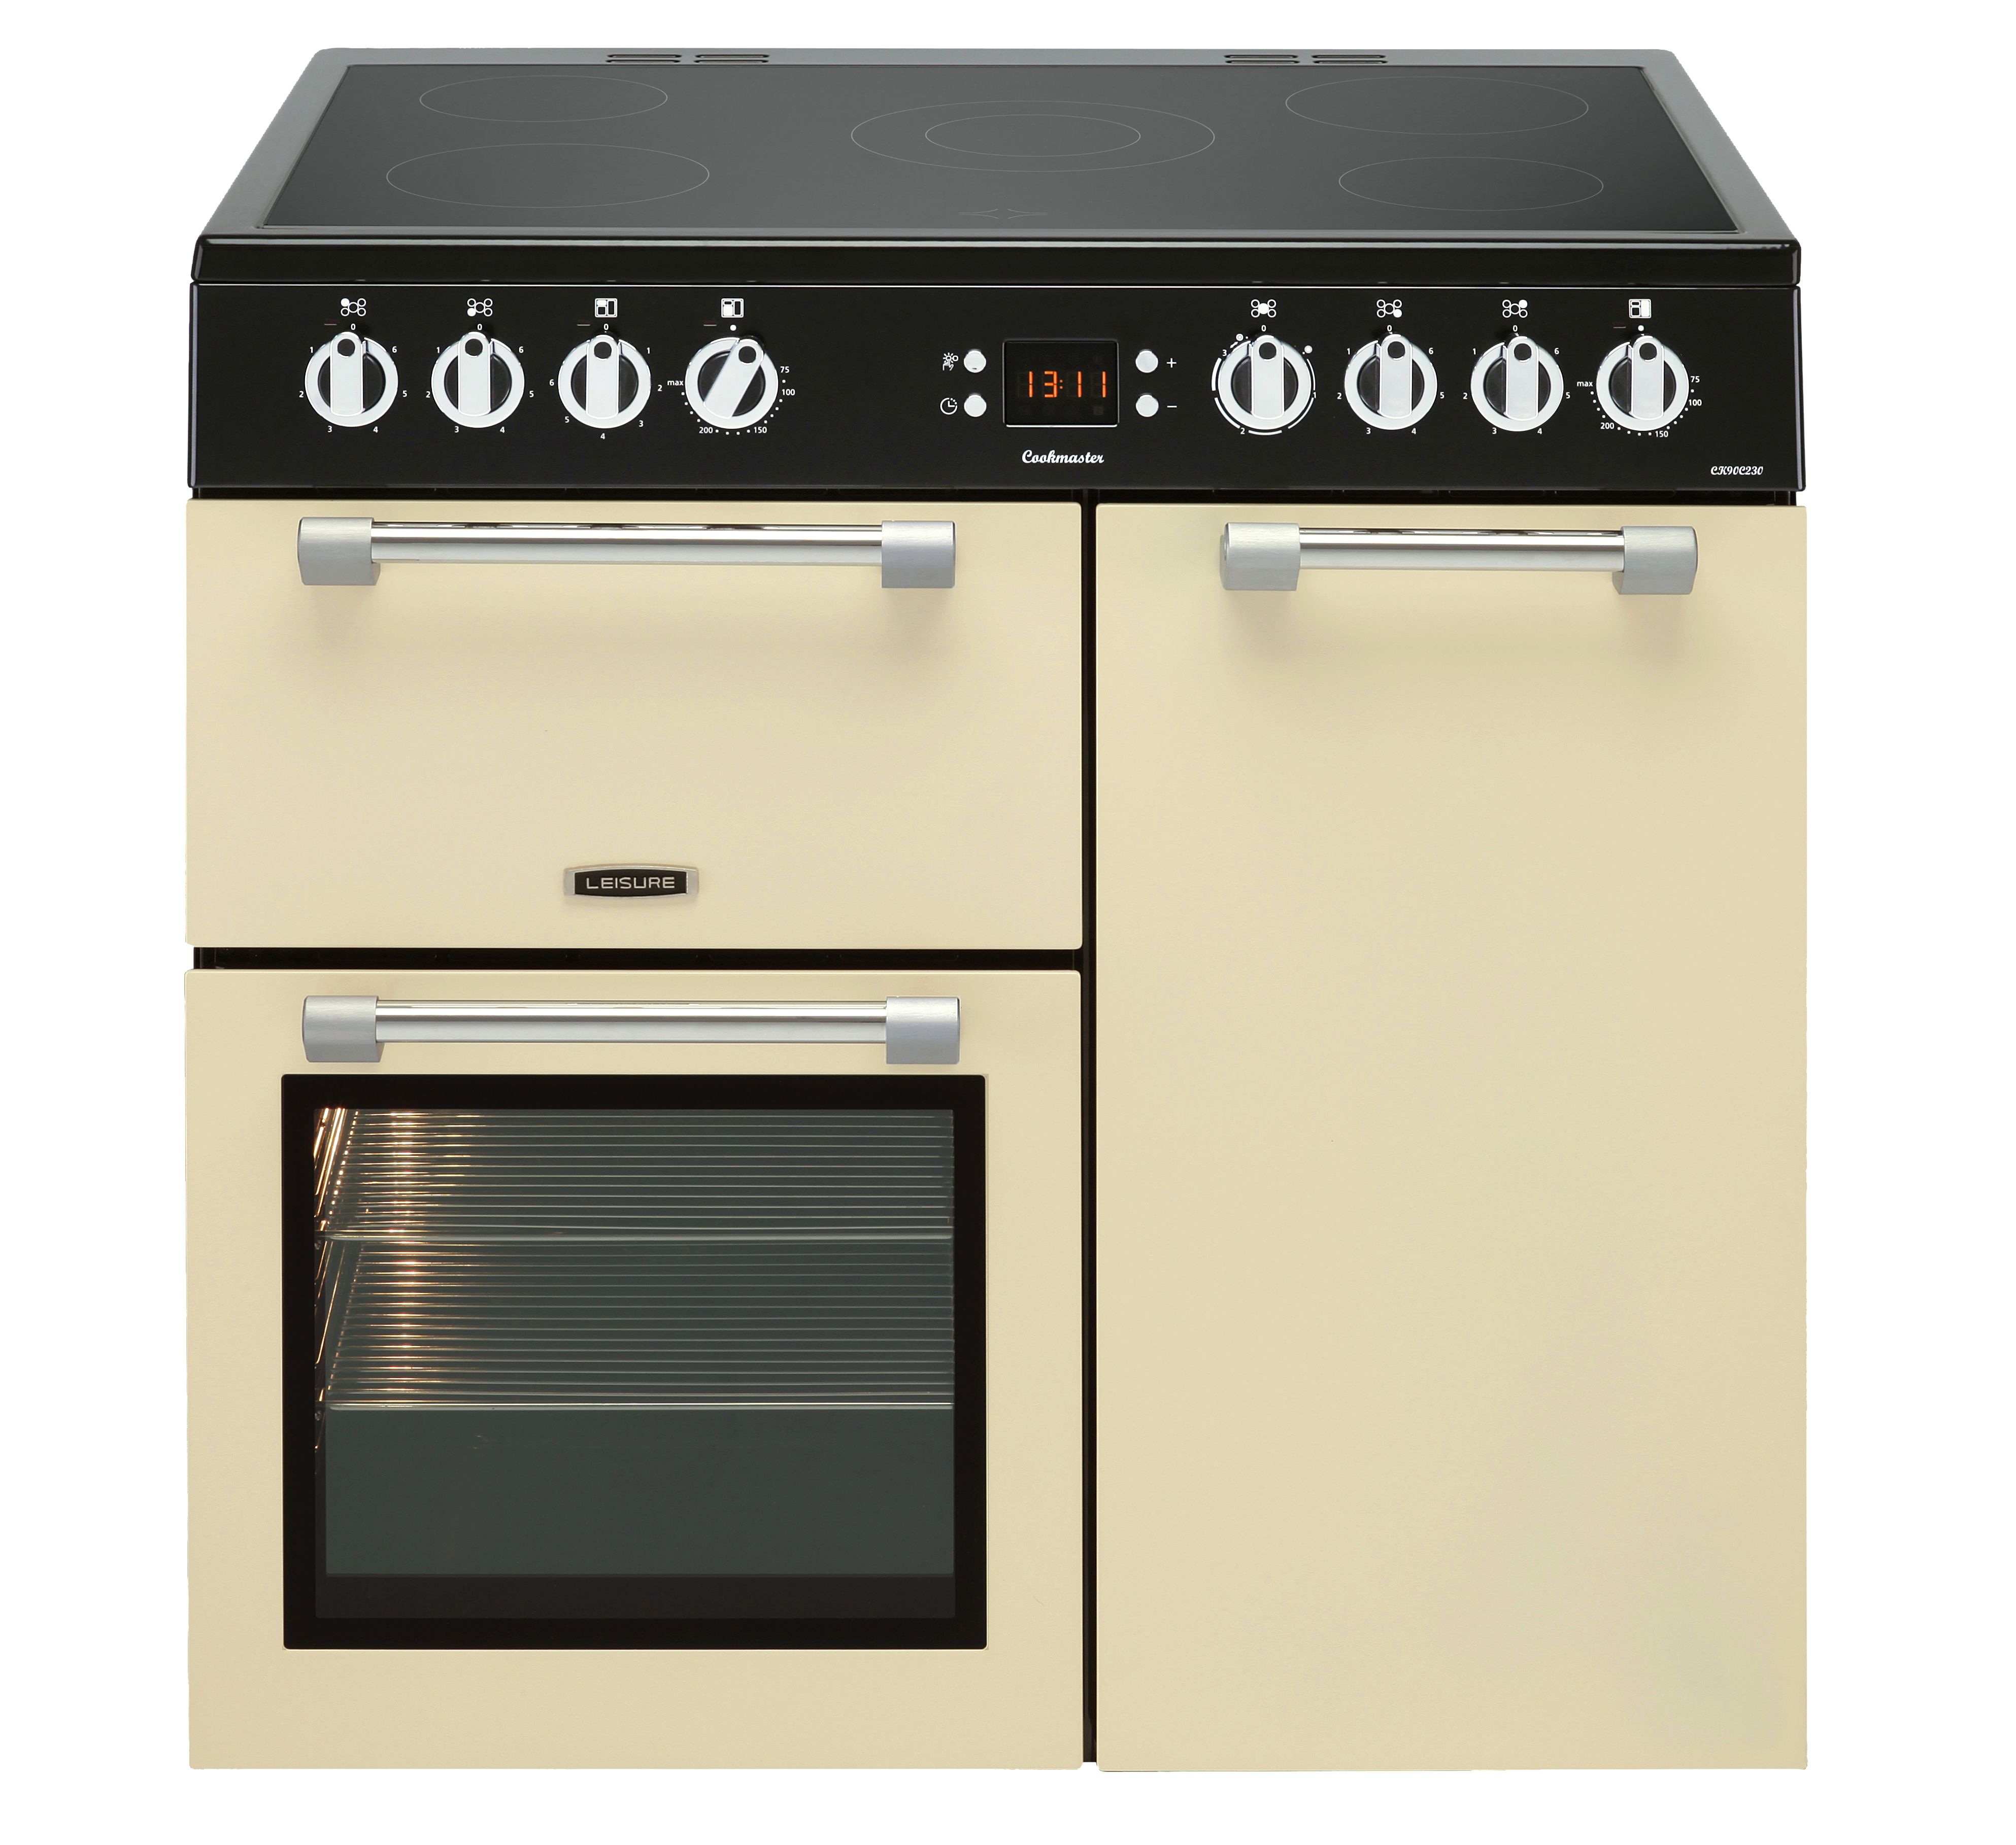 Leisure CK90C230C Freestanding Electric Range cooker with Electric Hob - Cream